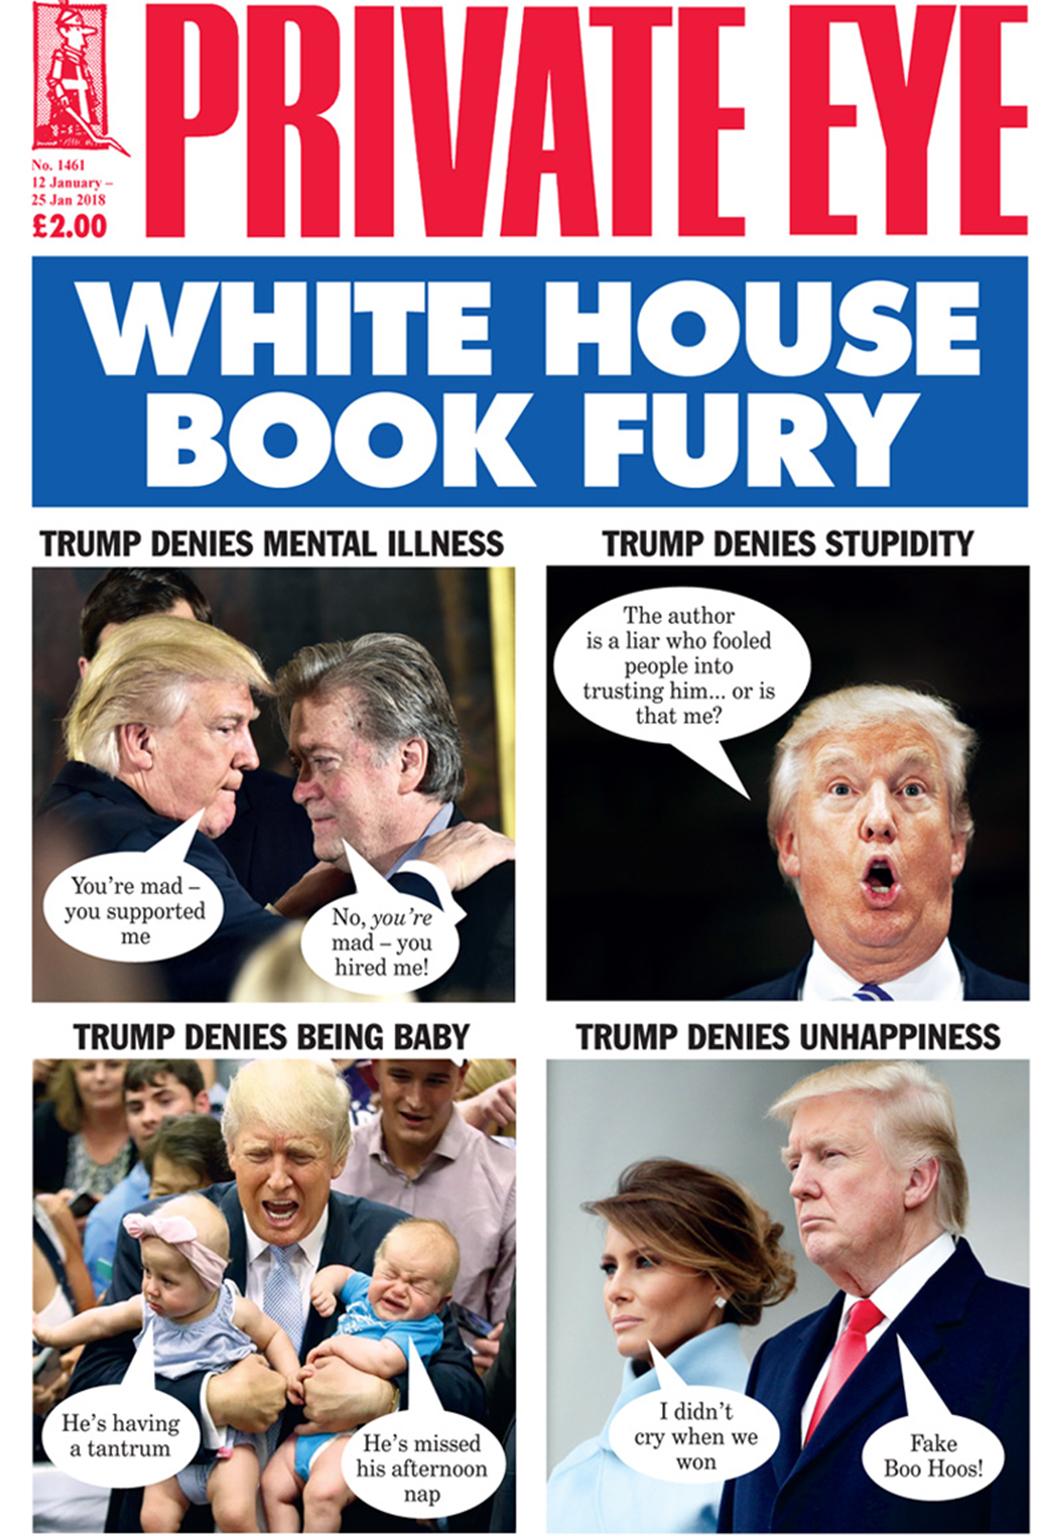 Private Eye’s front cover this week